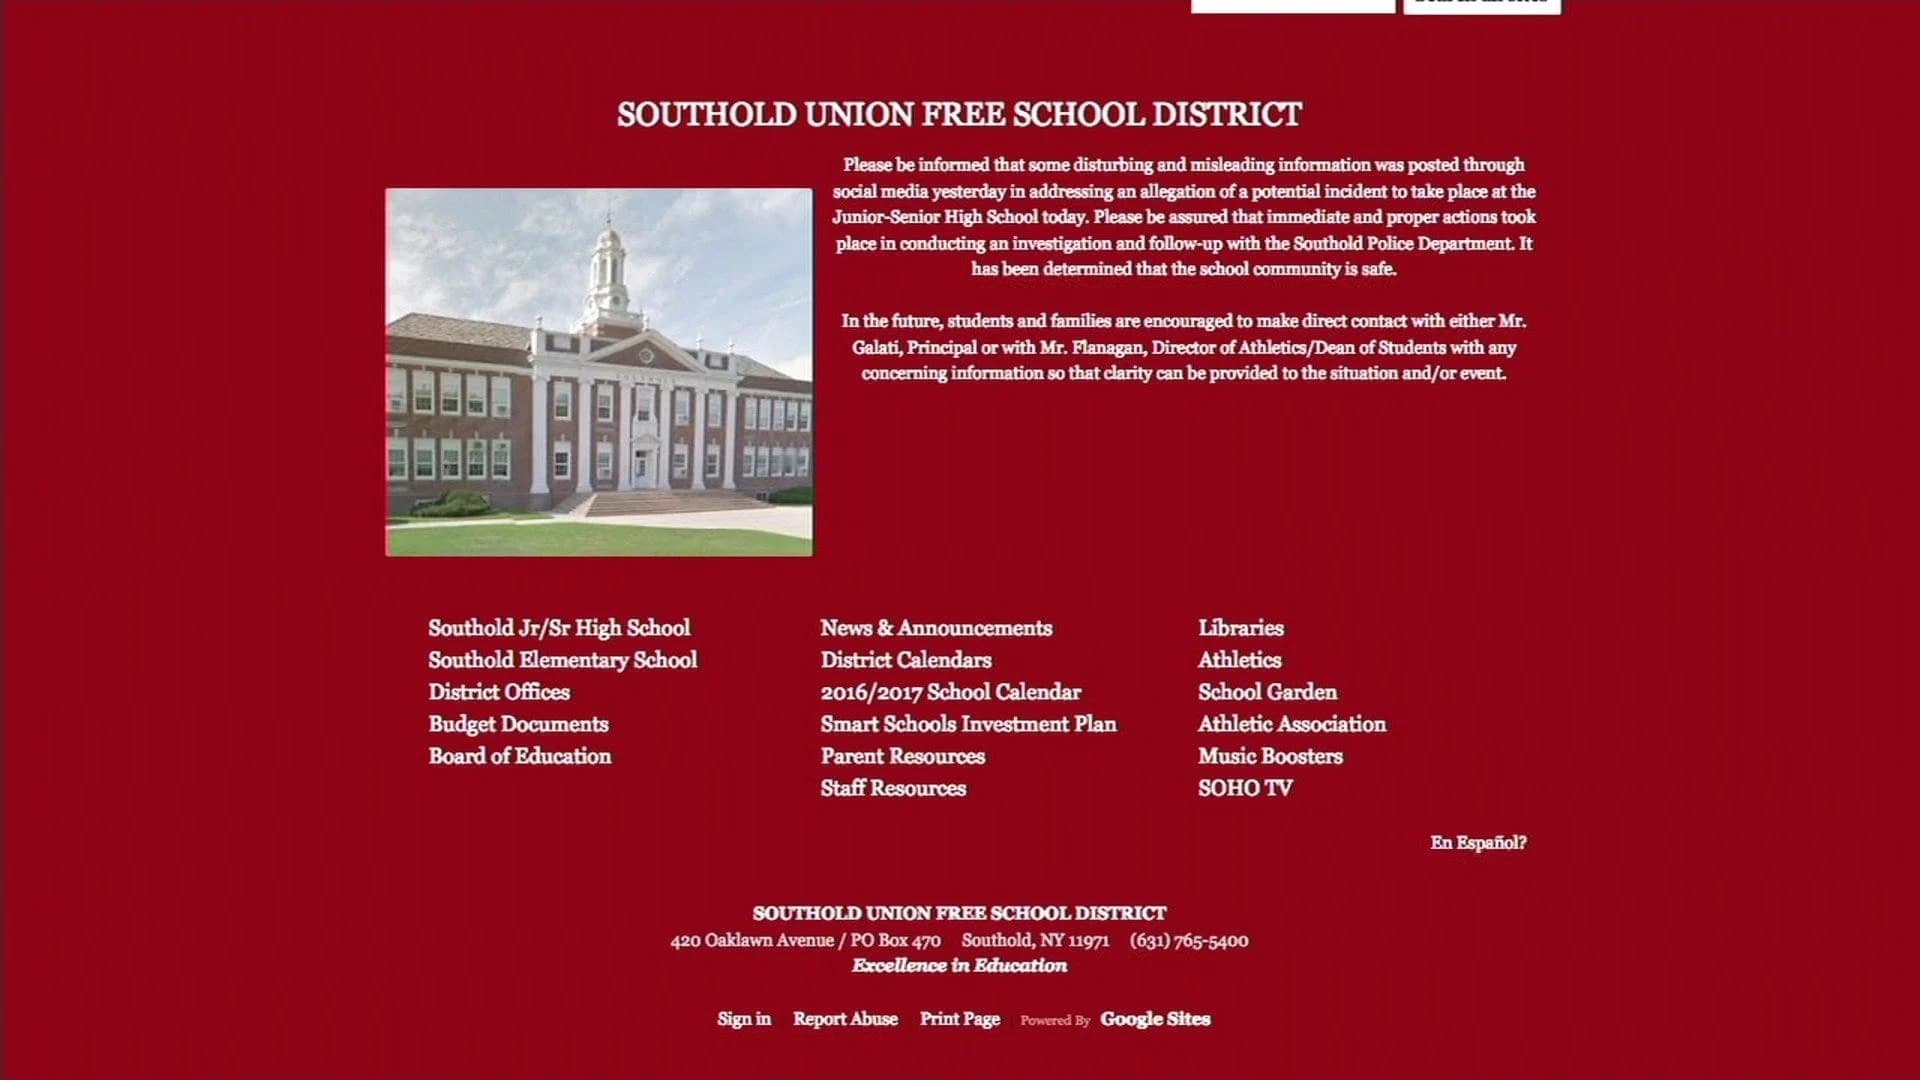 Extra school security in Southold after 'unfounded threat'